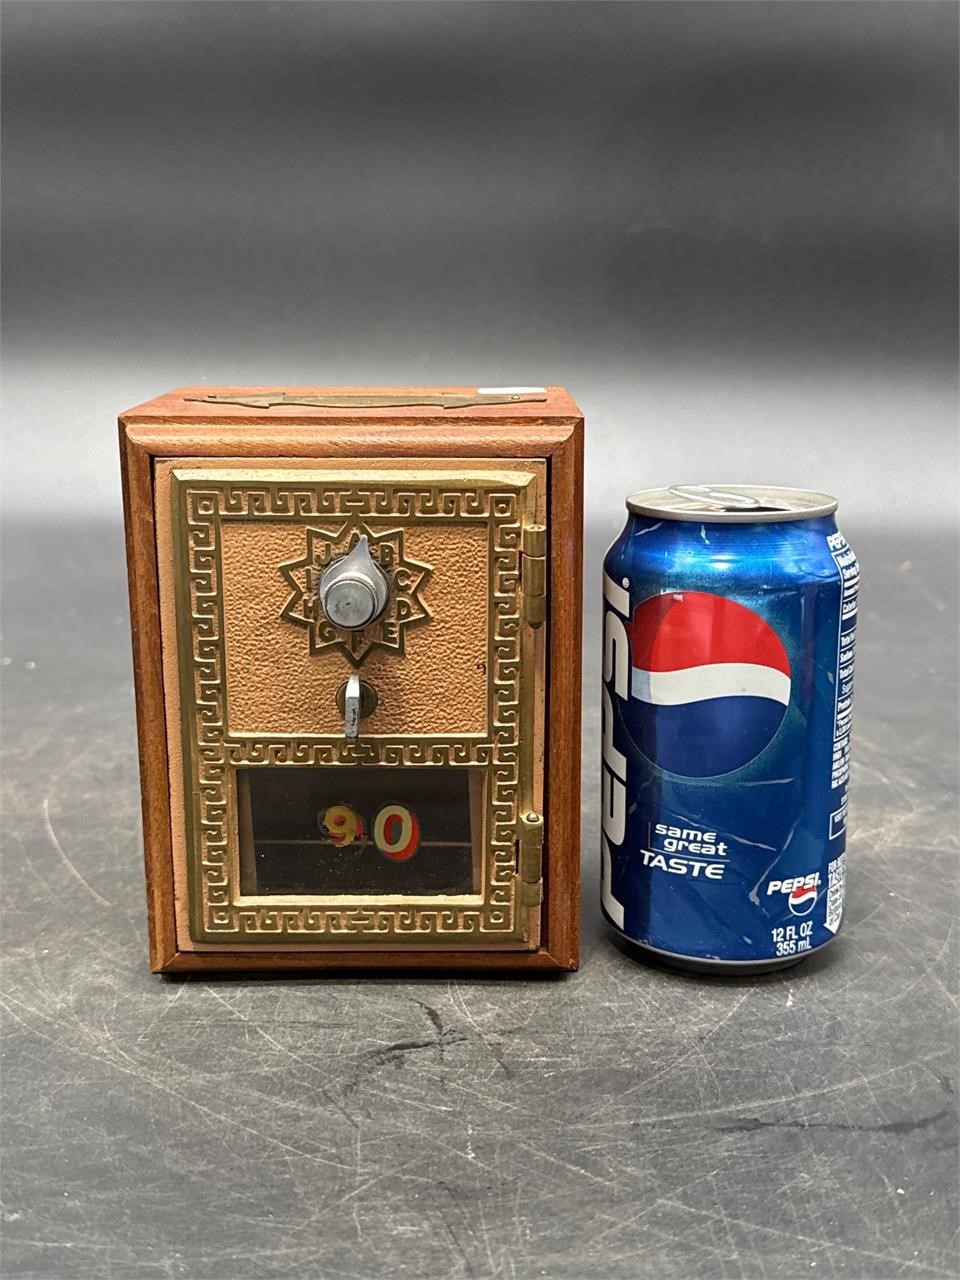 COAL MINE CO. STORE CLEANOUT AND TOBACCO POCKET TIN AUCTION